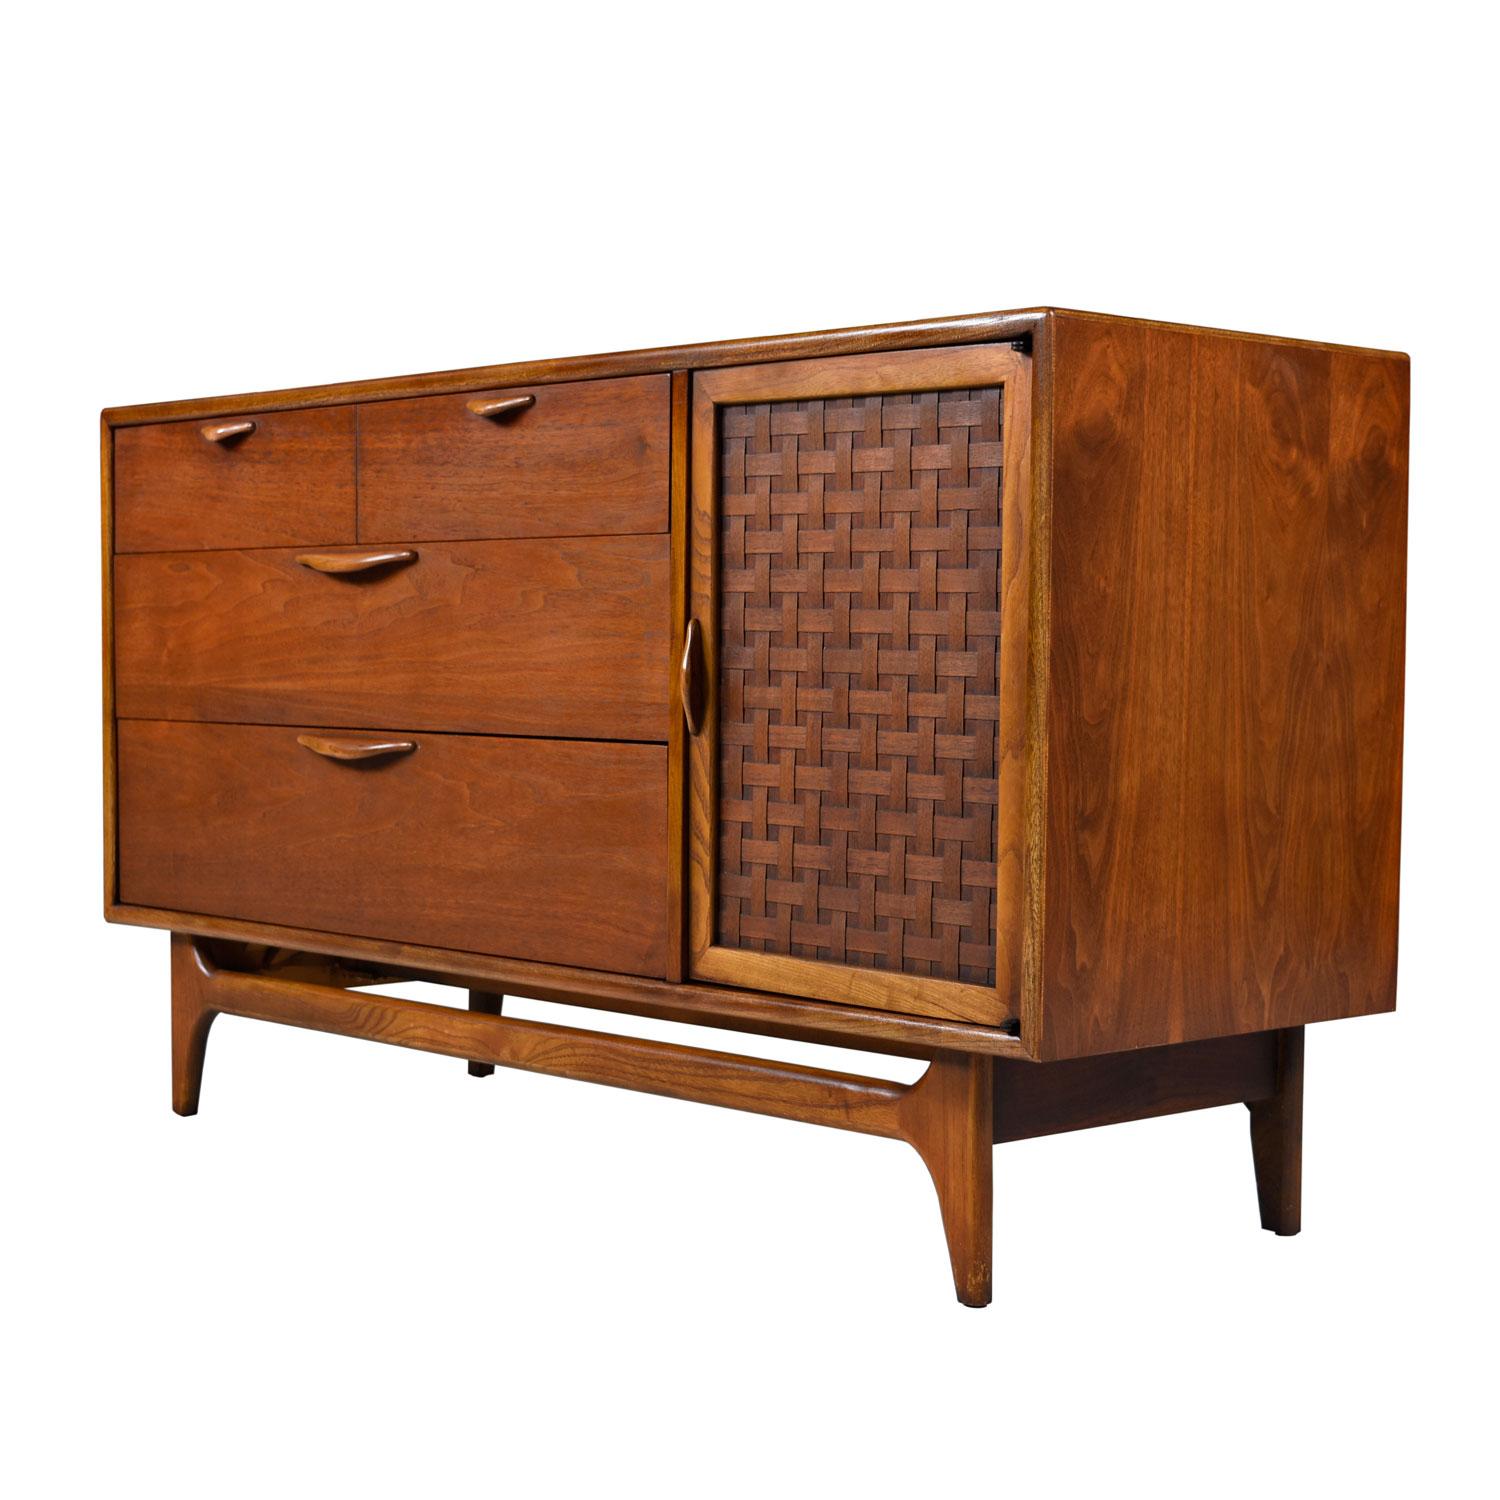 Mid-Century Modern Lane Perception credenza. Quality American construction paired with fine design. Top surface is walnut wood with contrasting oak trim tracing the perimeter. Solid walnut pulls on all four drawers. The top drawer is divided into 2